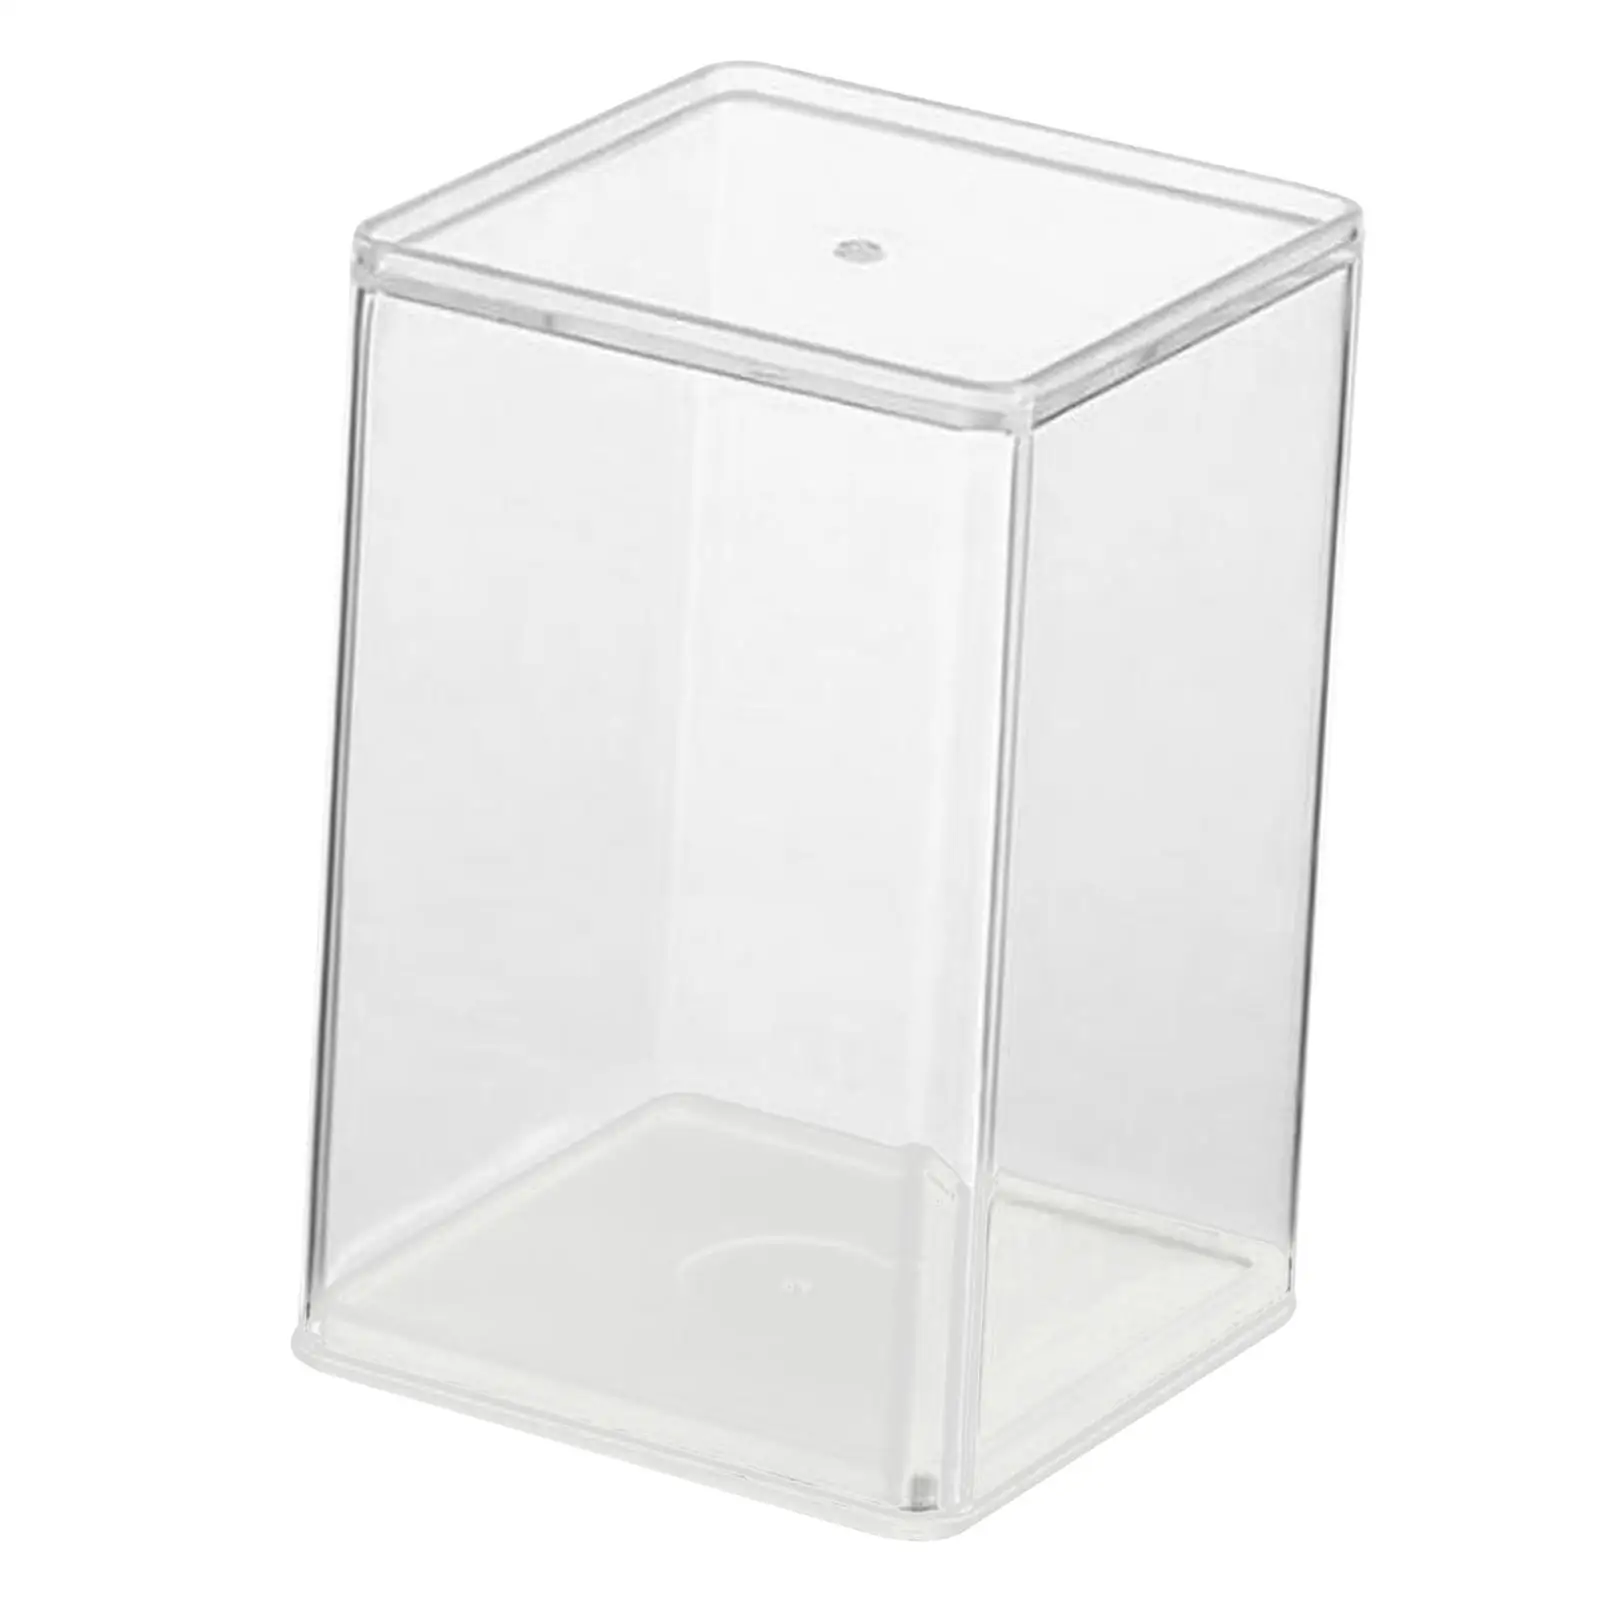 Acrylic Display Rack Organizer Assemble Countertop Box for Collectibles Kids